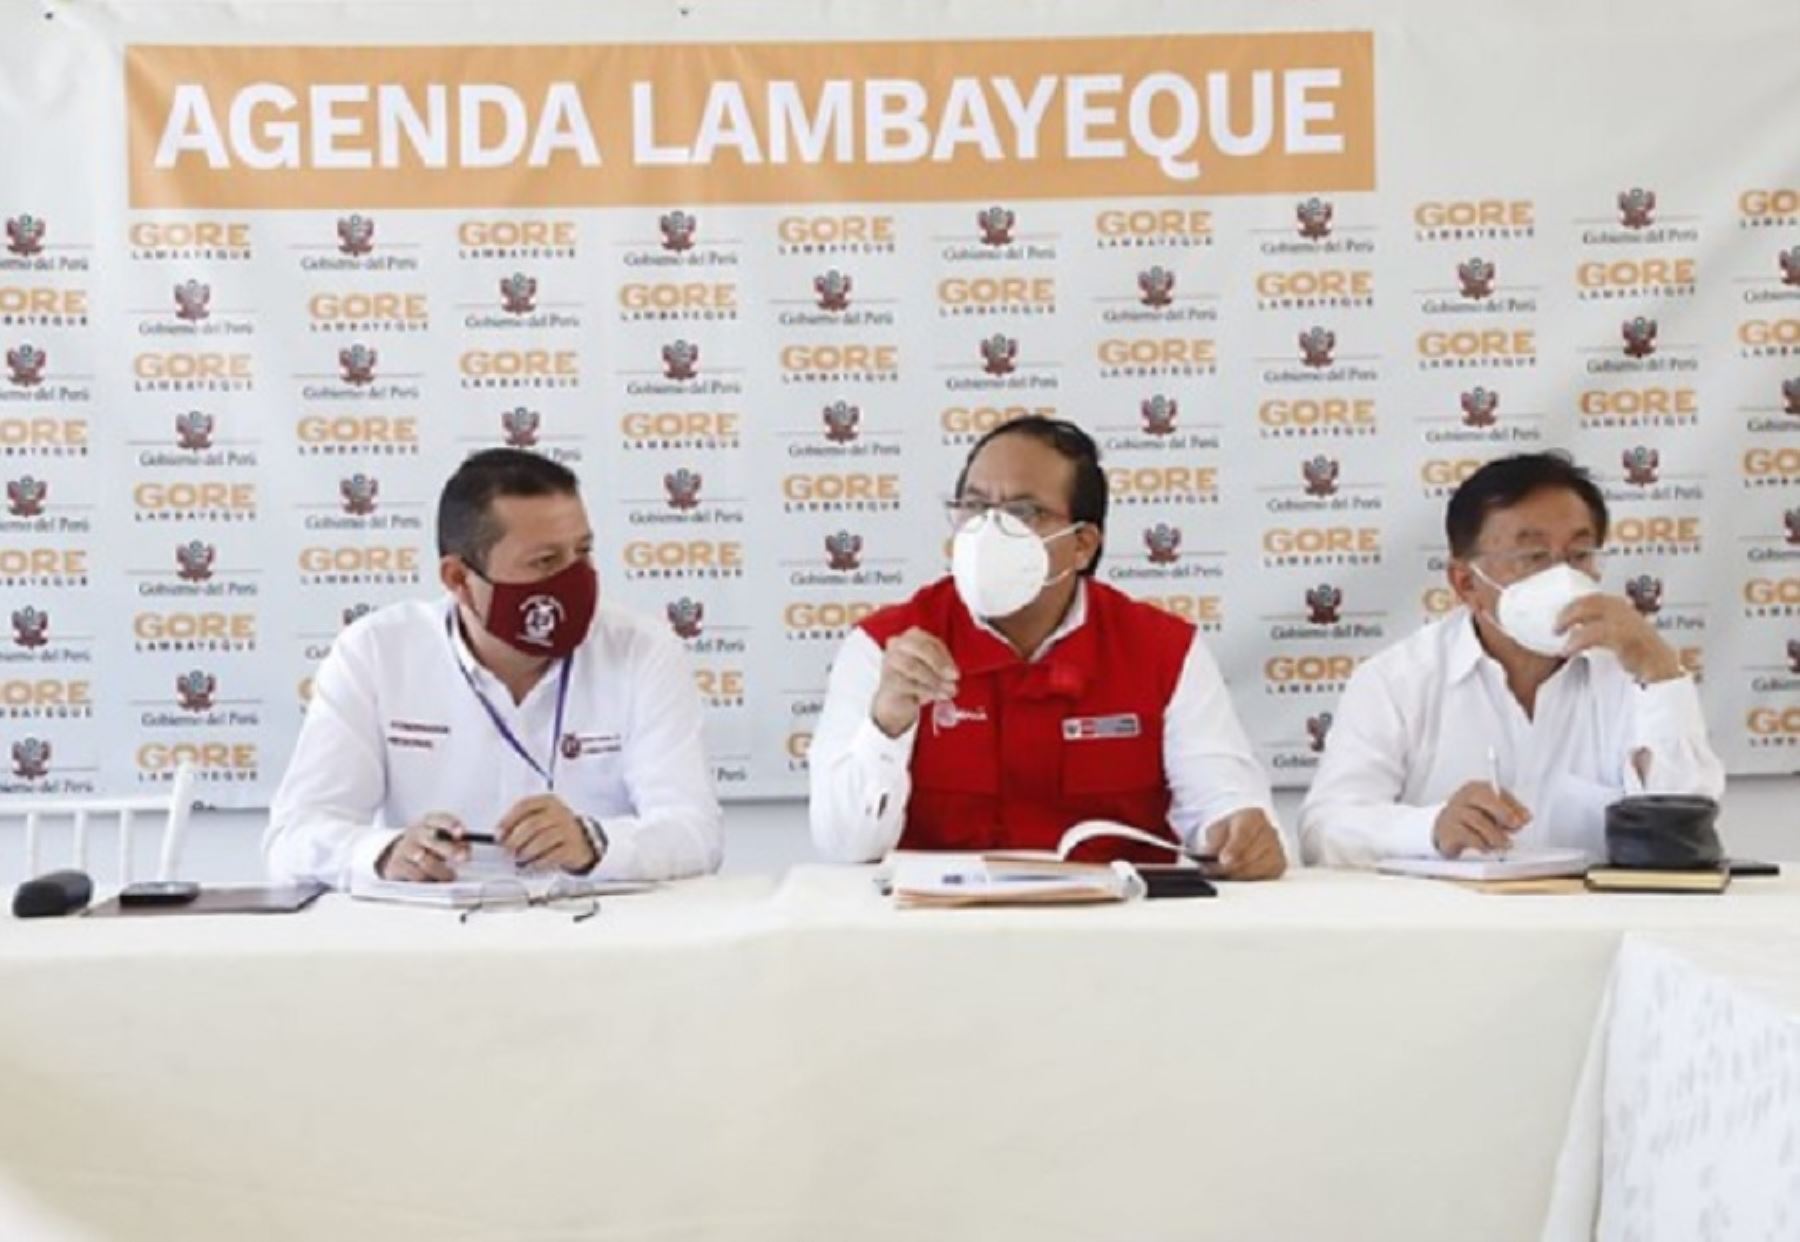 Mincetur to work on Lambayeque Agenda with export, tourism and investment boost |  News